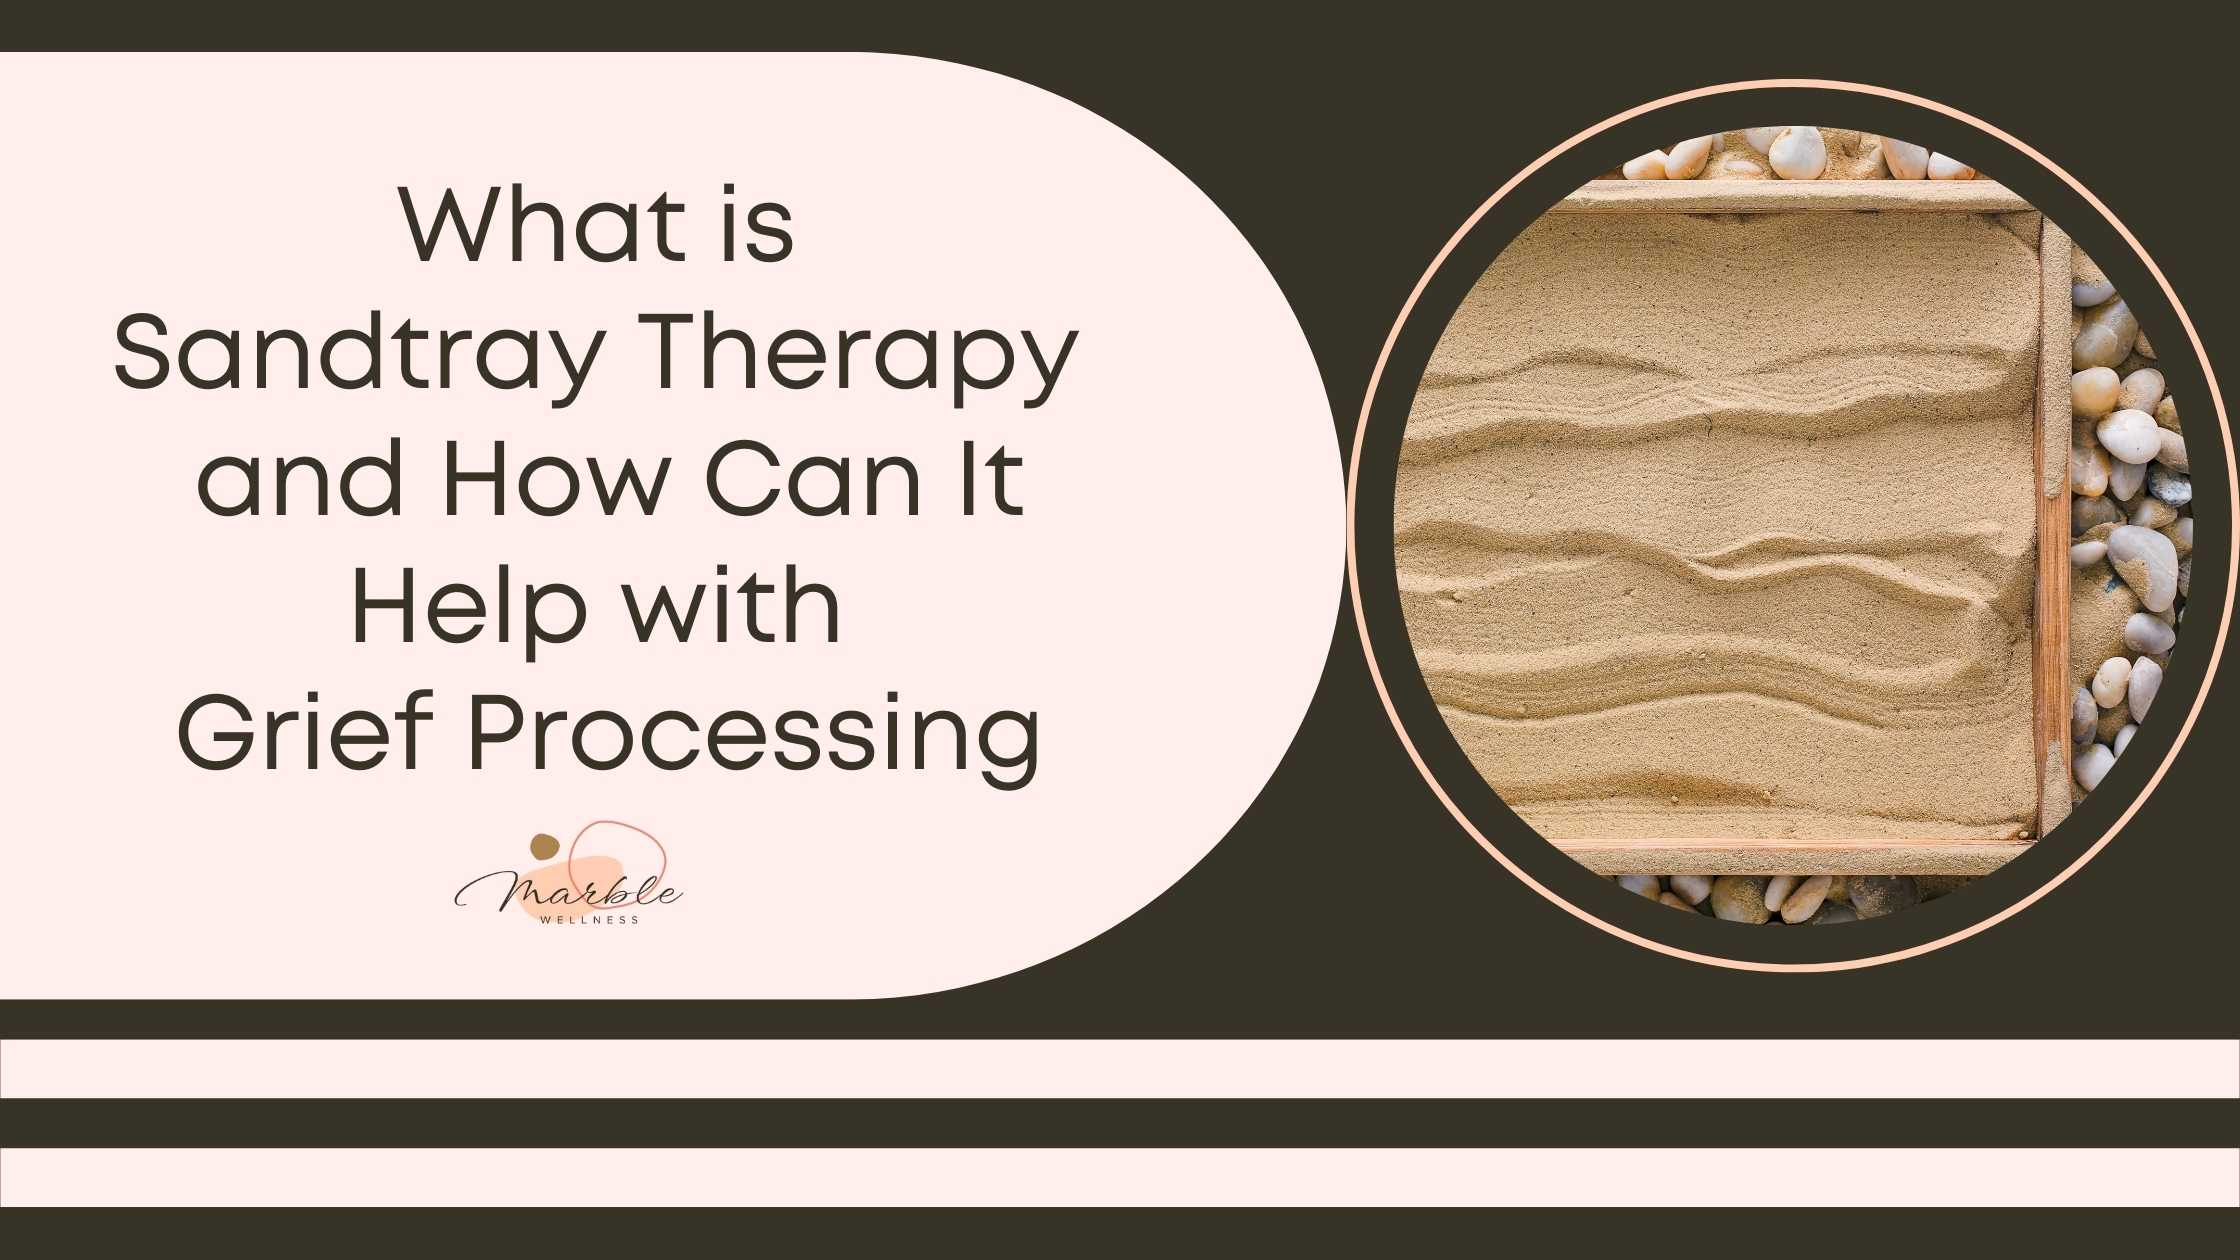 What is Sandtray Therapy and How Can It Help with Grief Processing?